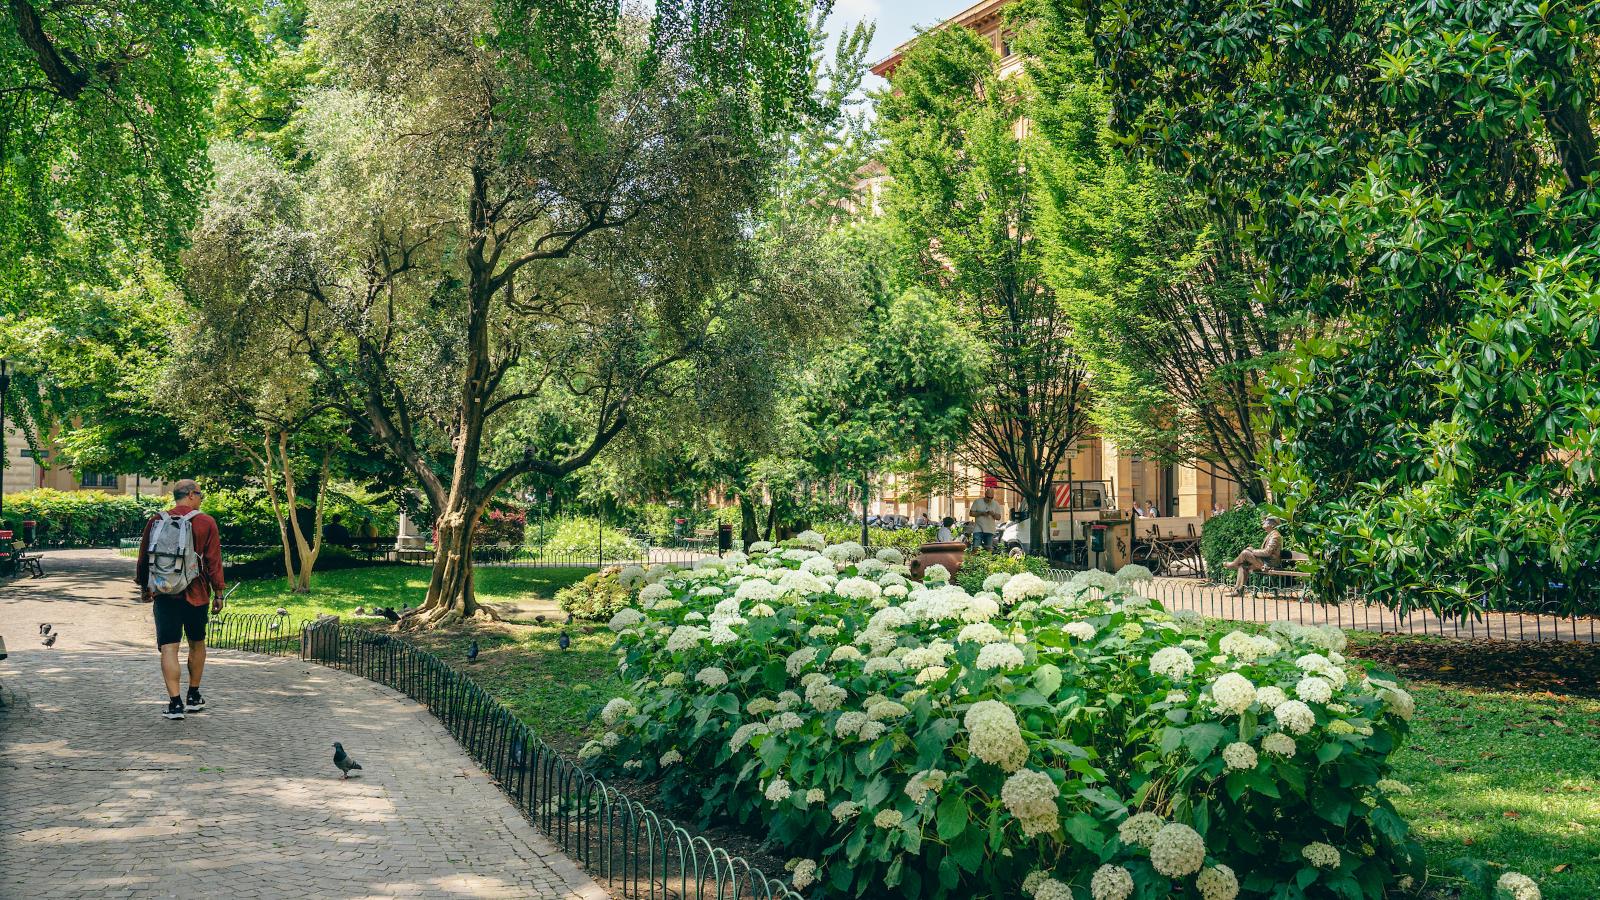 What to do in springtime in Bologna